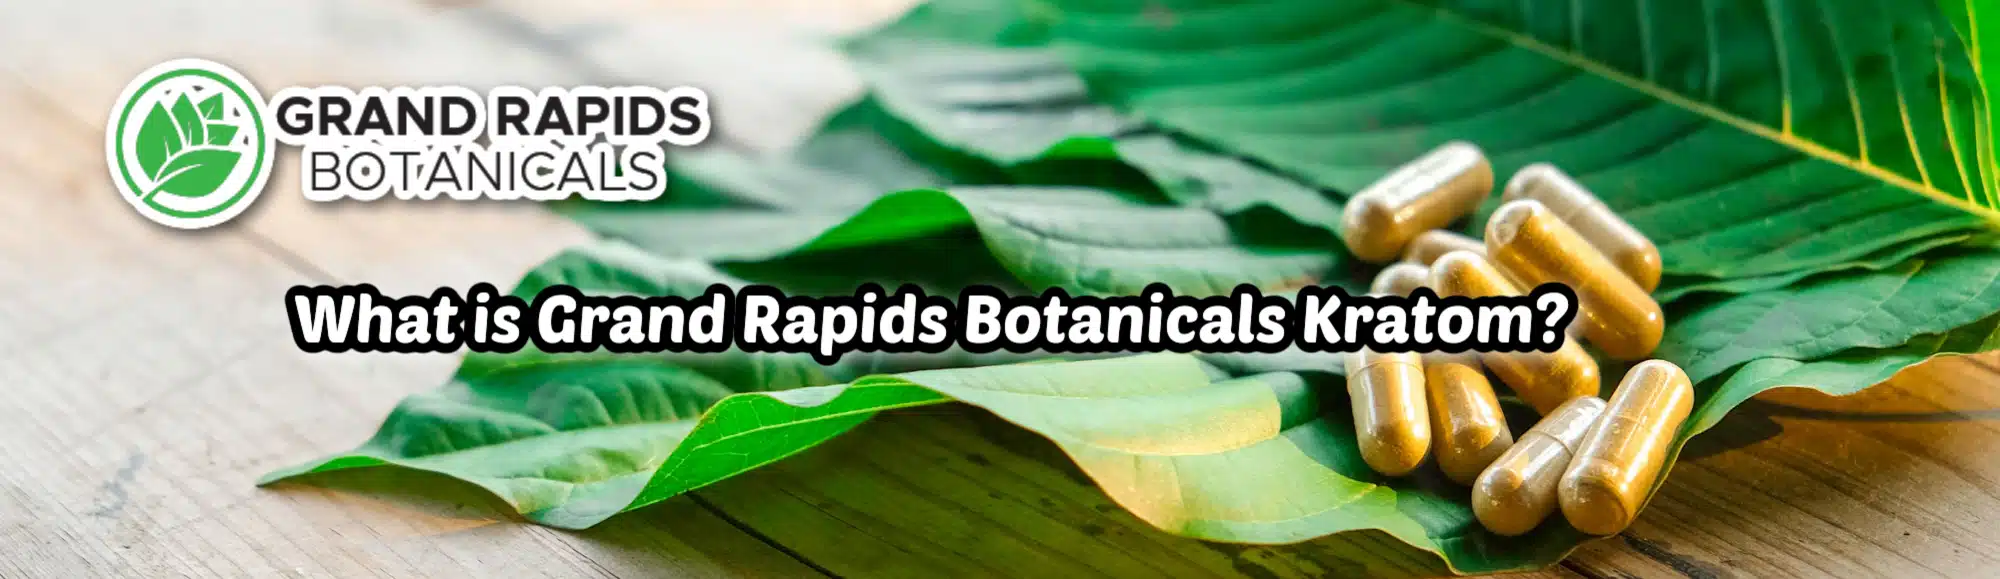 "What is Grand rapids botanicals kratom?" banner and logo